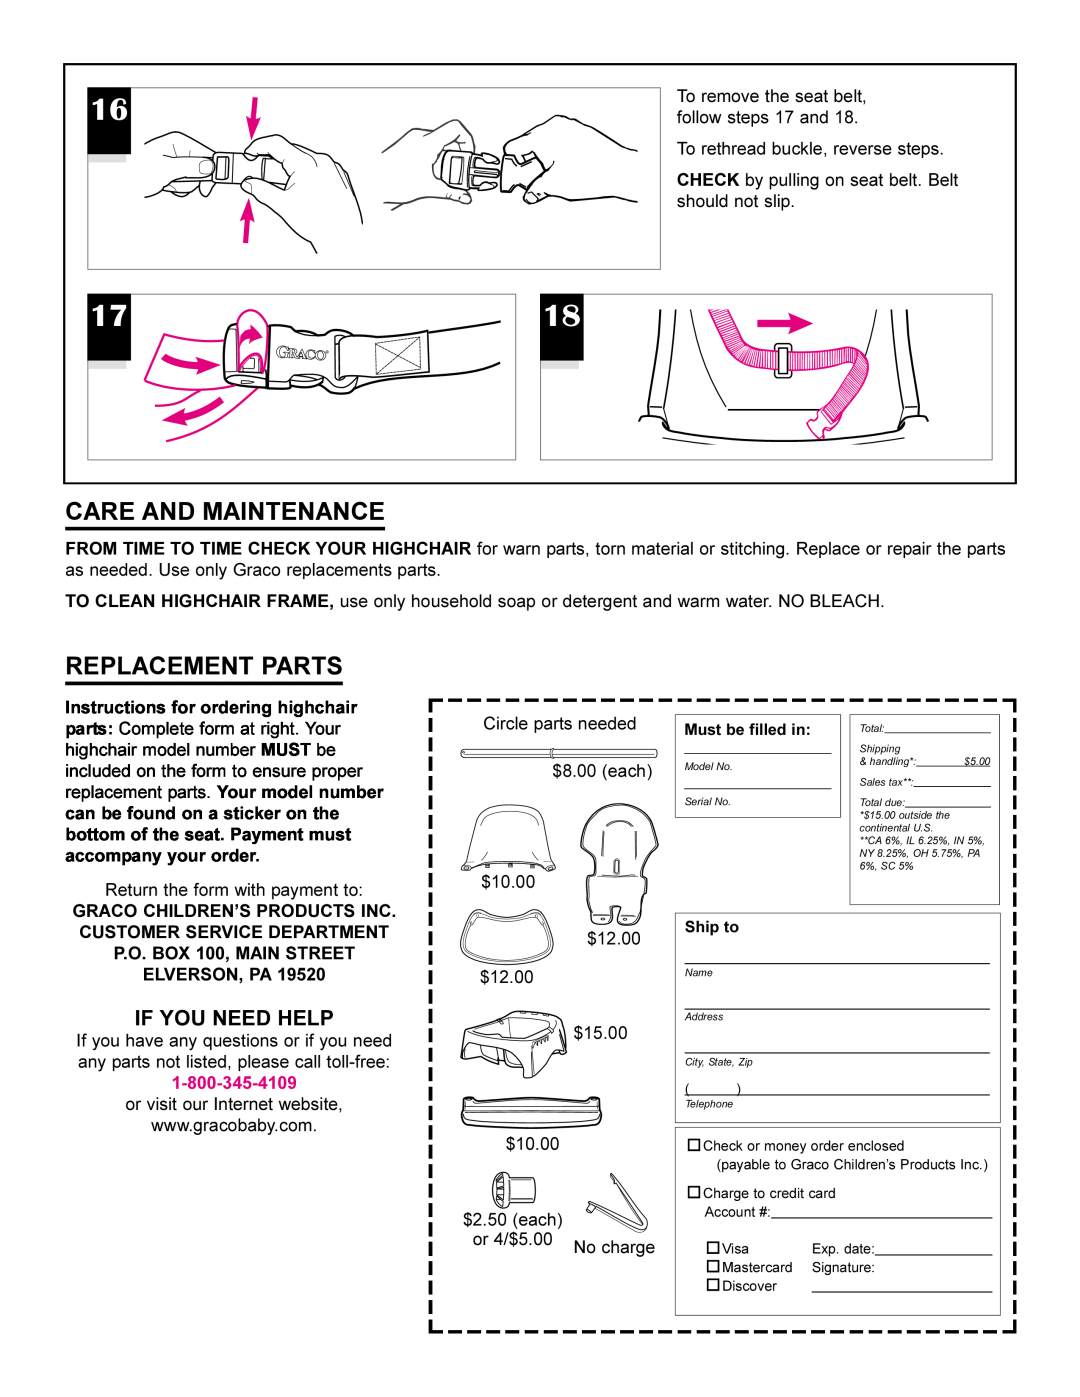 Graco 3165 owner manual Care And Maintenance, Replacement Parts, If You Need Help 